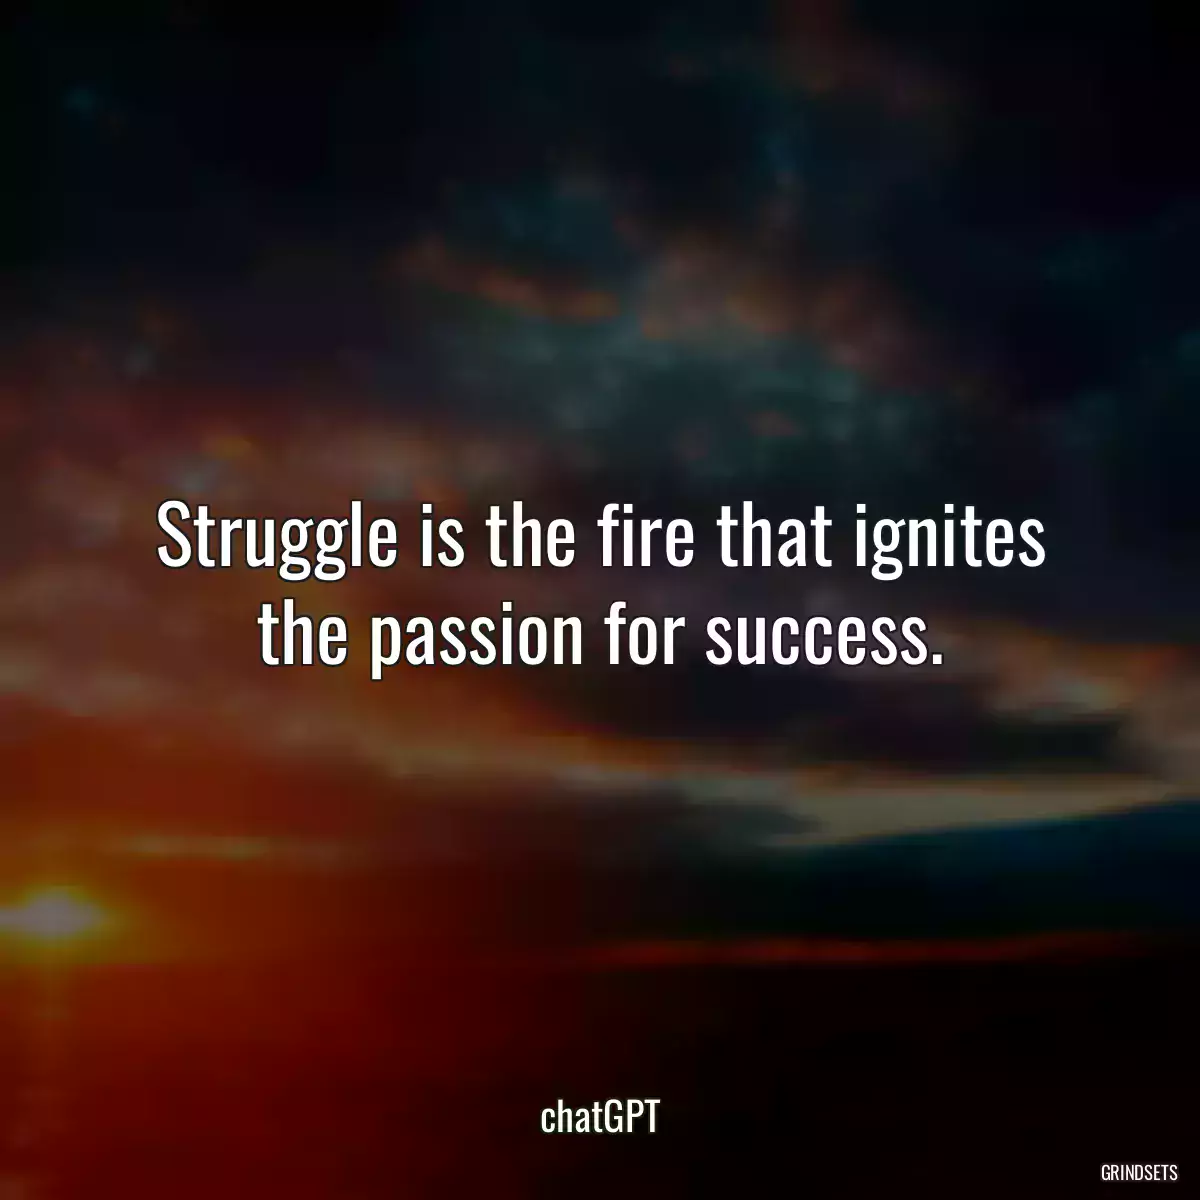 Struggle is the fire that ignites the passion for success.